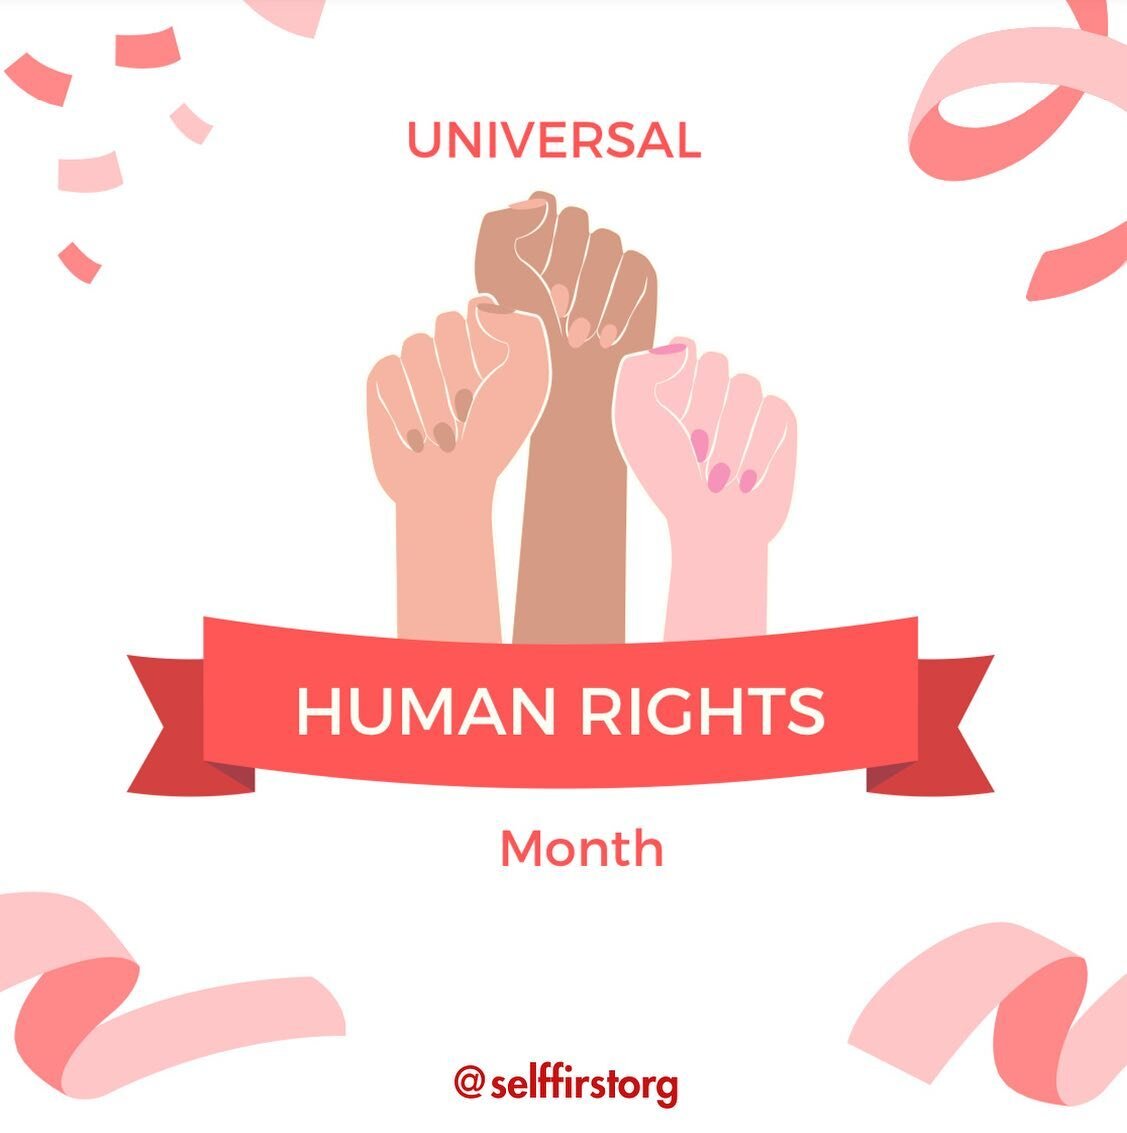 In honor of today, December 10th, being the anniversary for the signing of the Declaration of Human Rights in 1948. 

Recognizing this day does not mean merely appreciation for these policies, but demanding the rights for those currently being violat